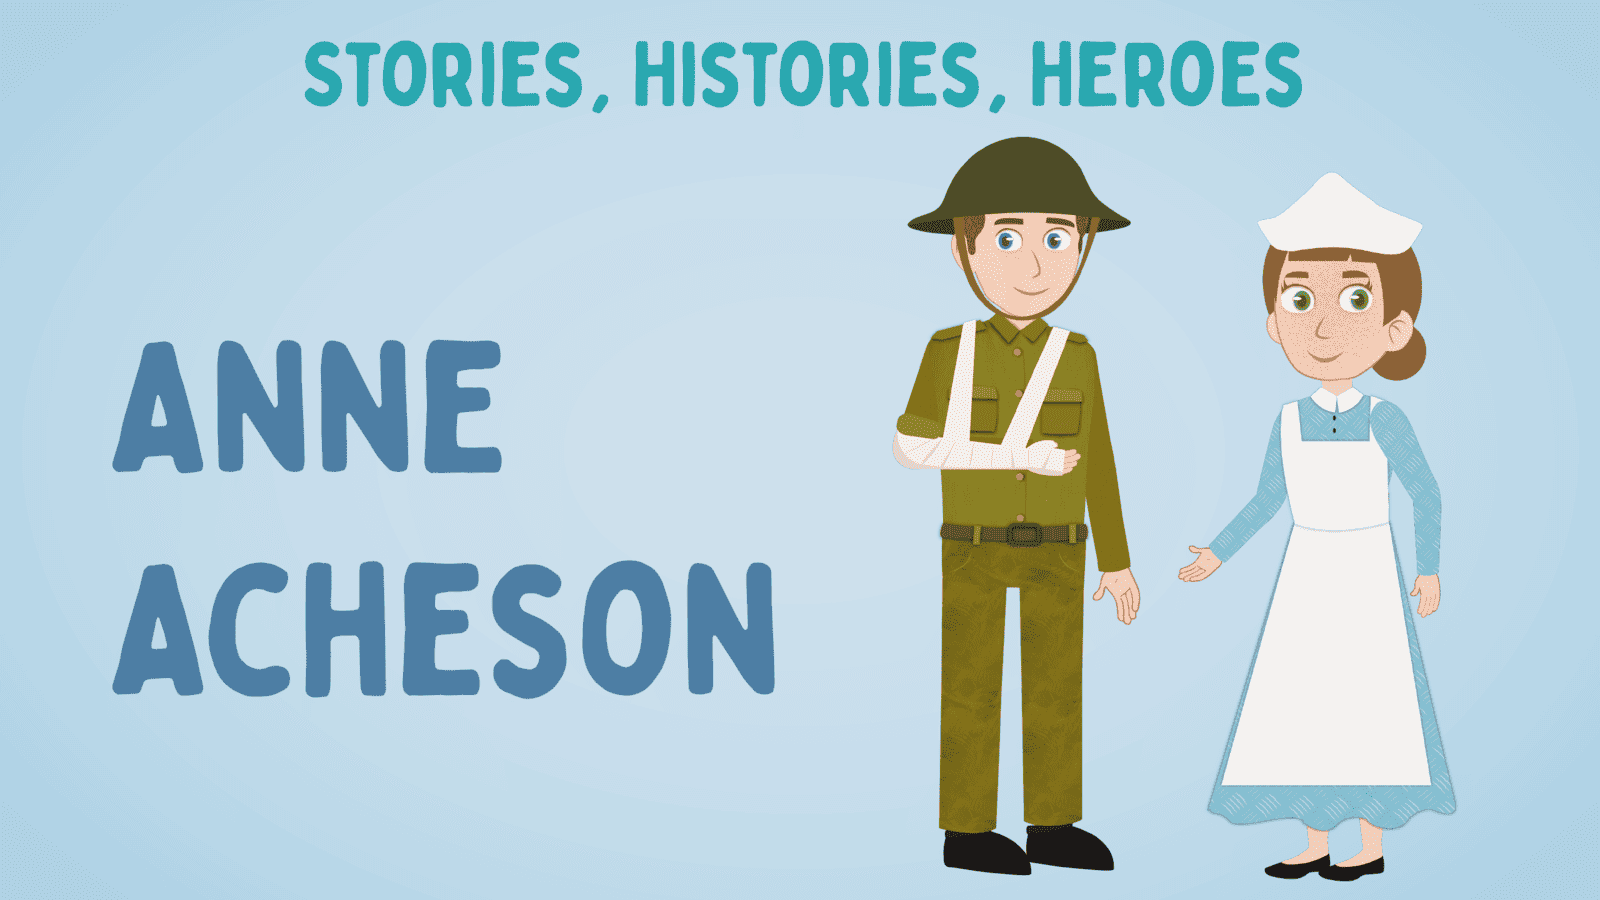 Anne Acheson: An Ulster-Scots Innovator and her Invention of the Plaster Cast